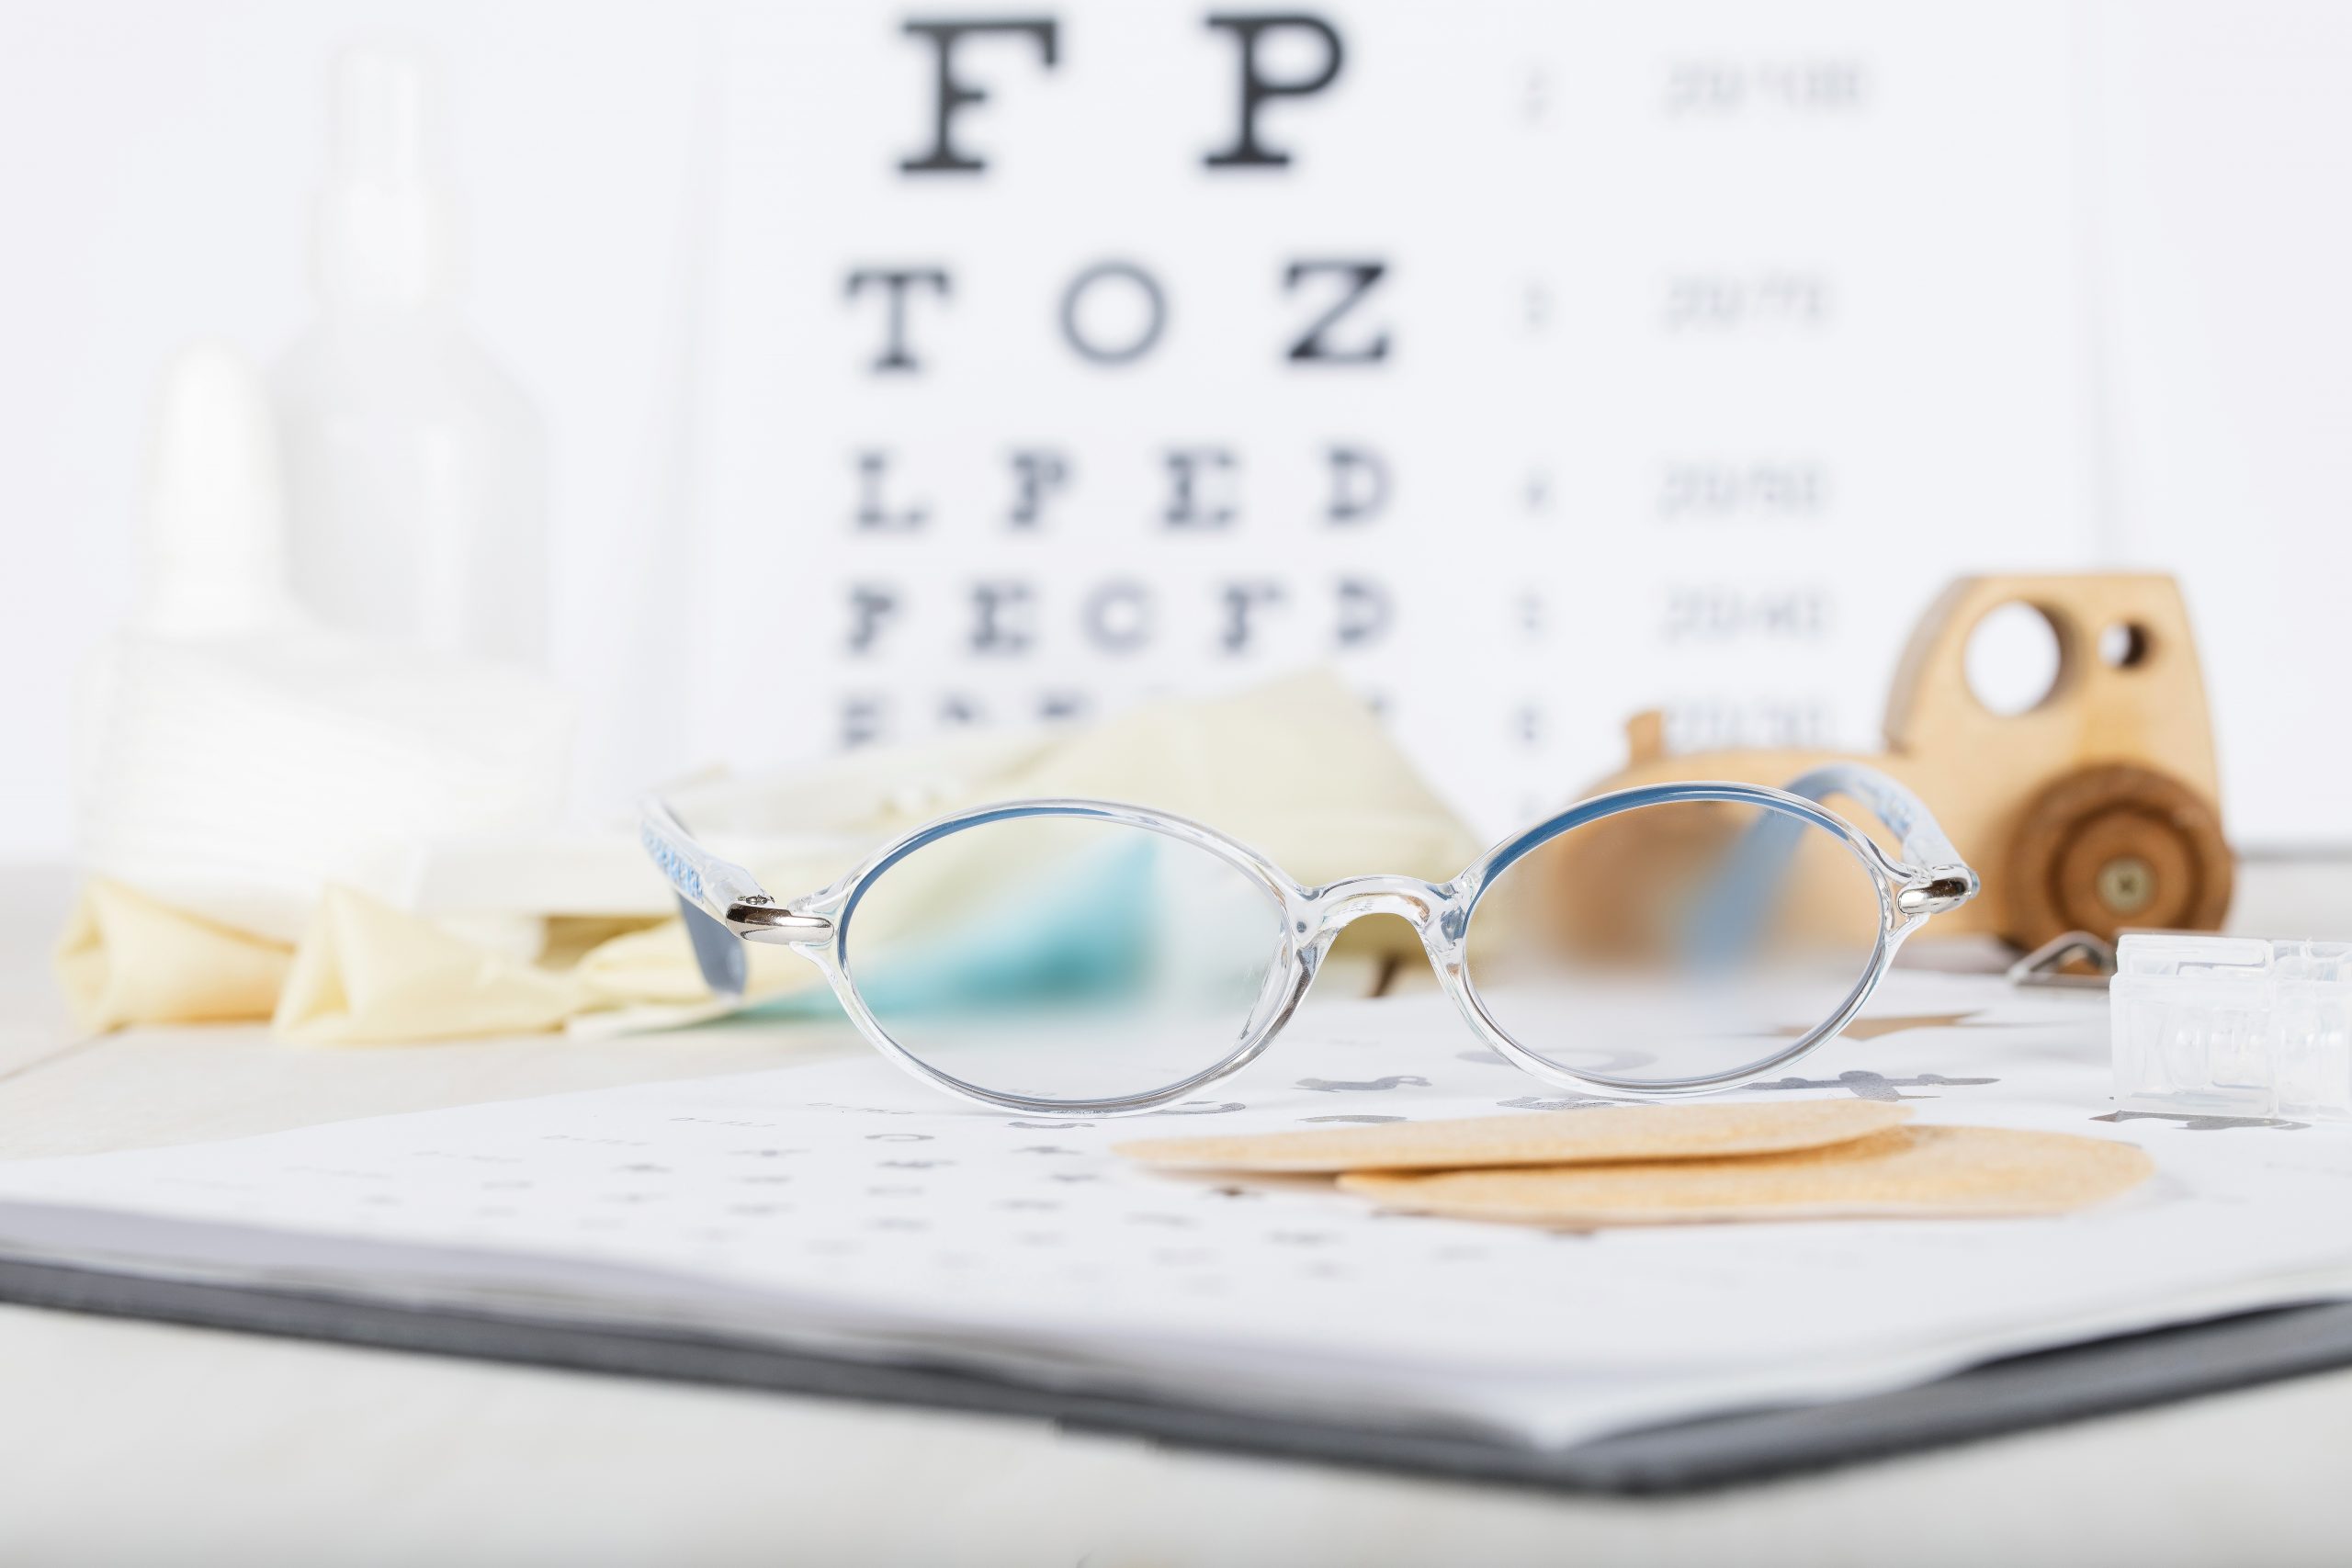 Eyeglasses for children on a eye chart close to eye pads.